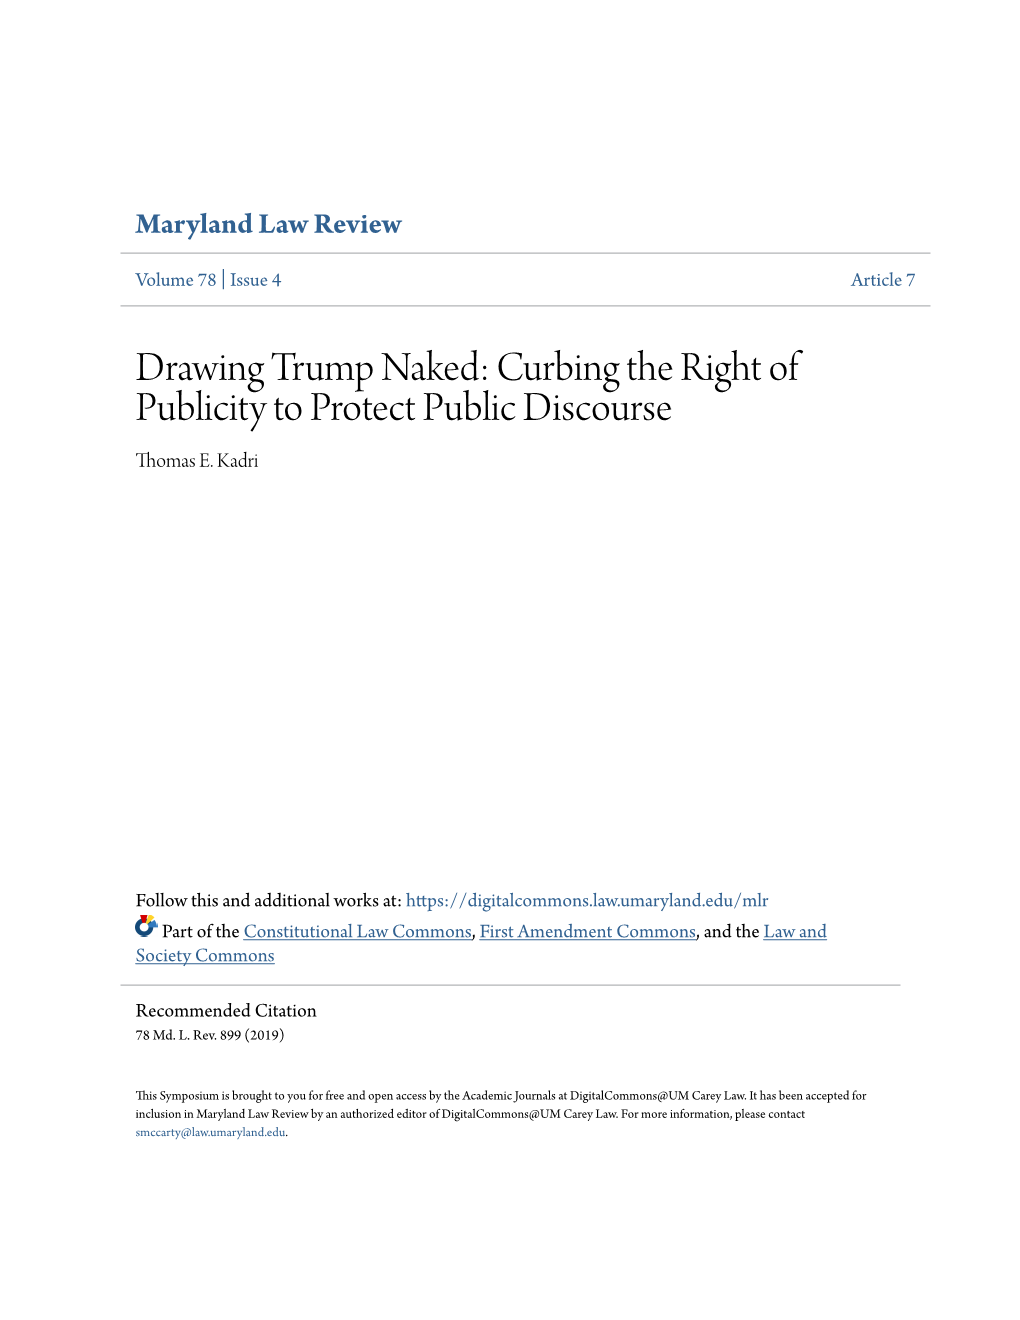 Drawing Trump Naked: Curbing the Right of Publicity to Protect Public Discourse Thomas E